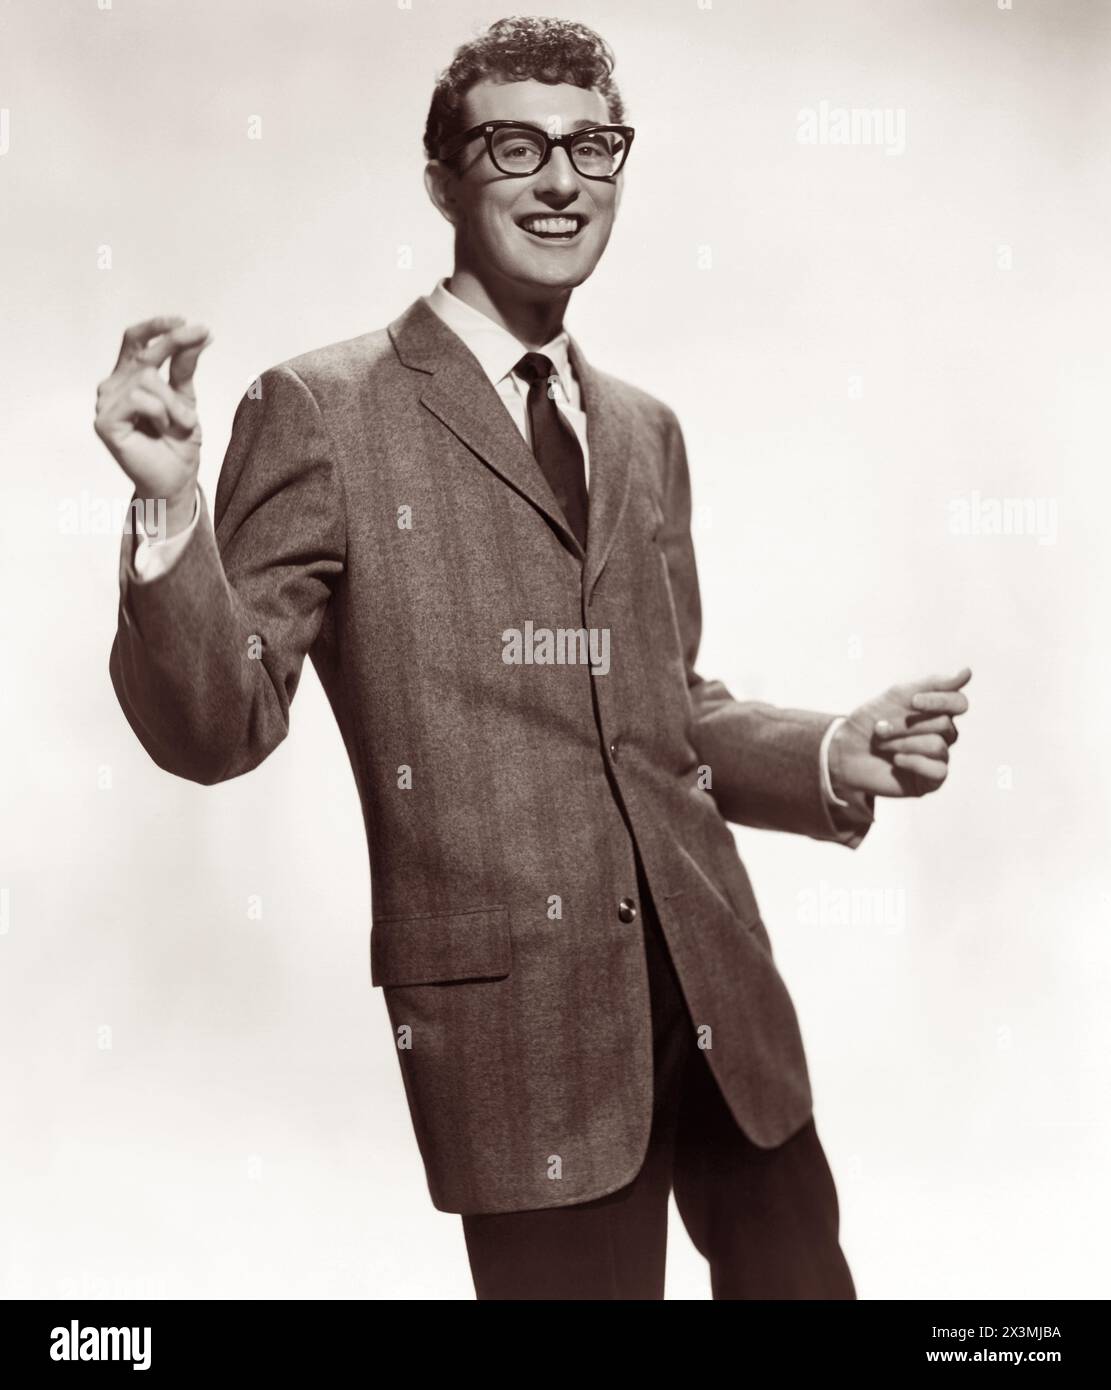 Buddy Holly, pioneer American rock and roll musician in 1957. Holly died at 22 in a tragic plane accident in 1959, along with musicians Richie Valens and J. P. Richardson (the Big Bopper), and pilot Roger Peterson. (USA) Stock Photo